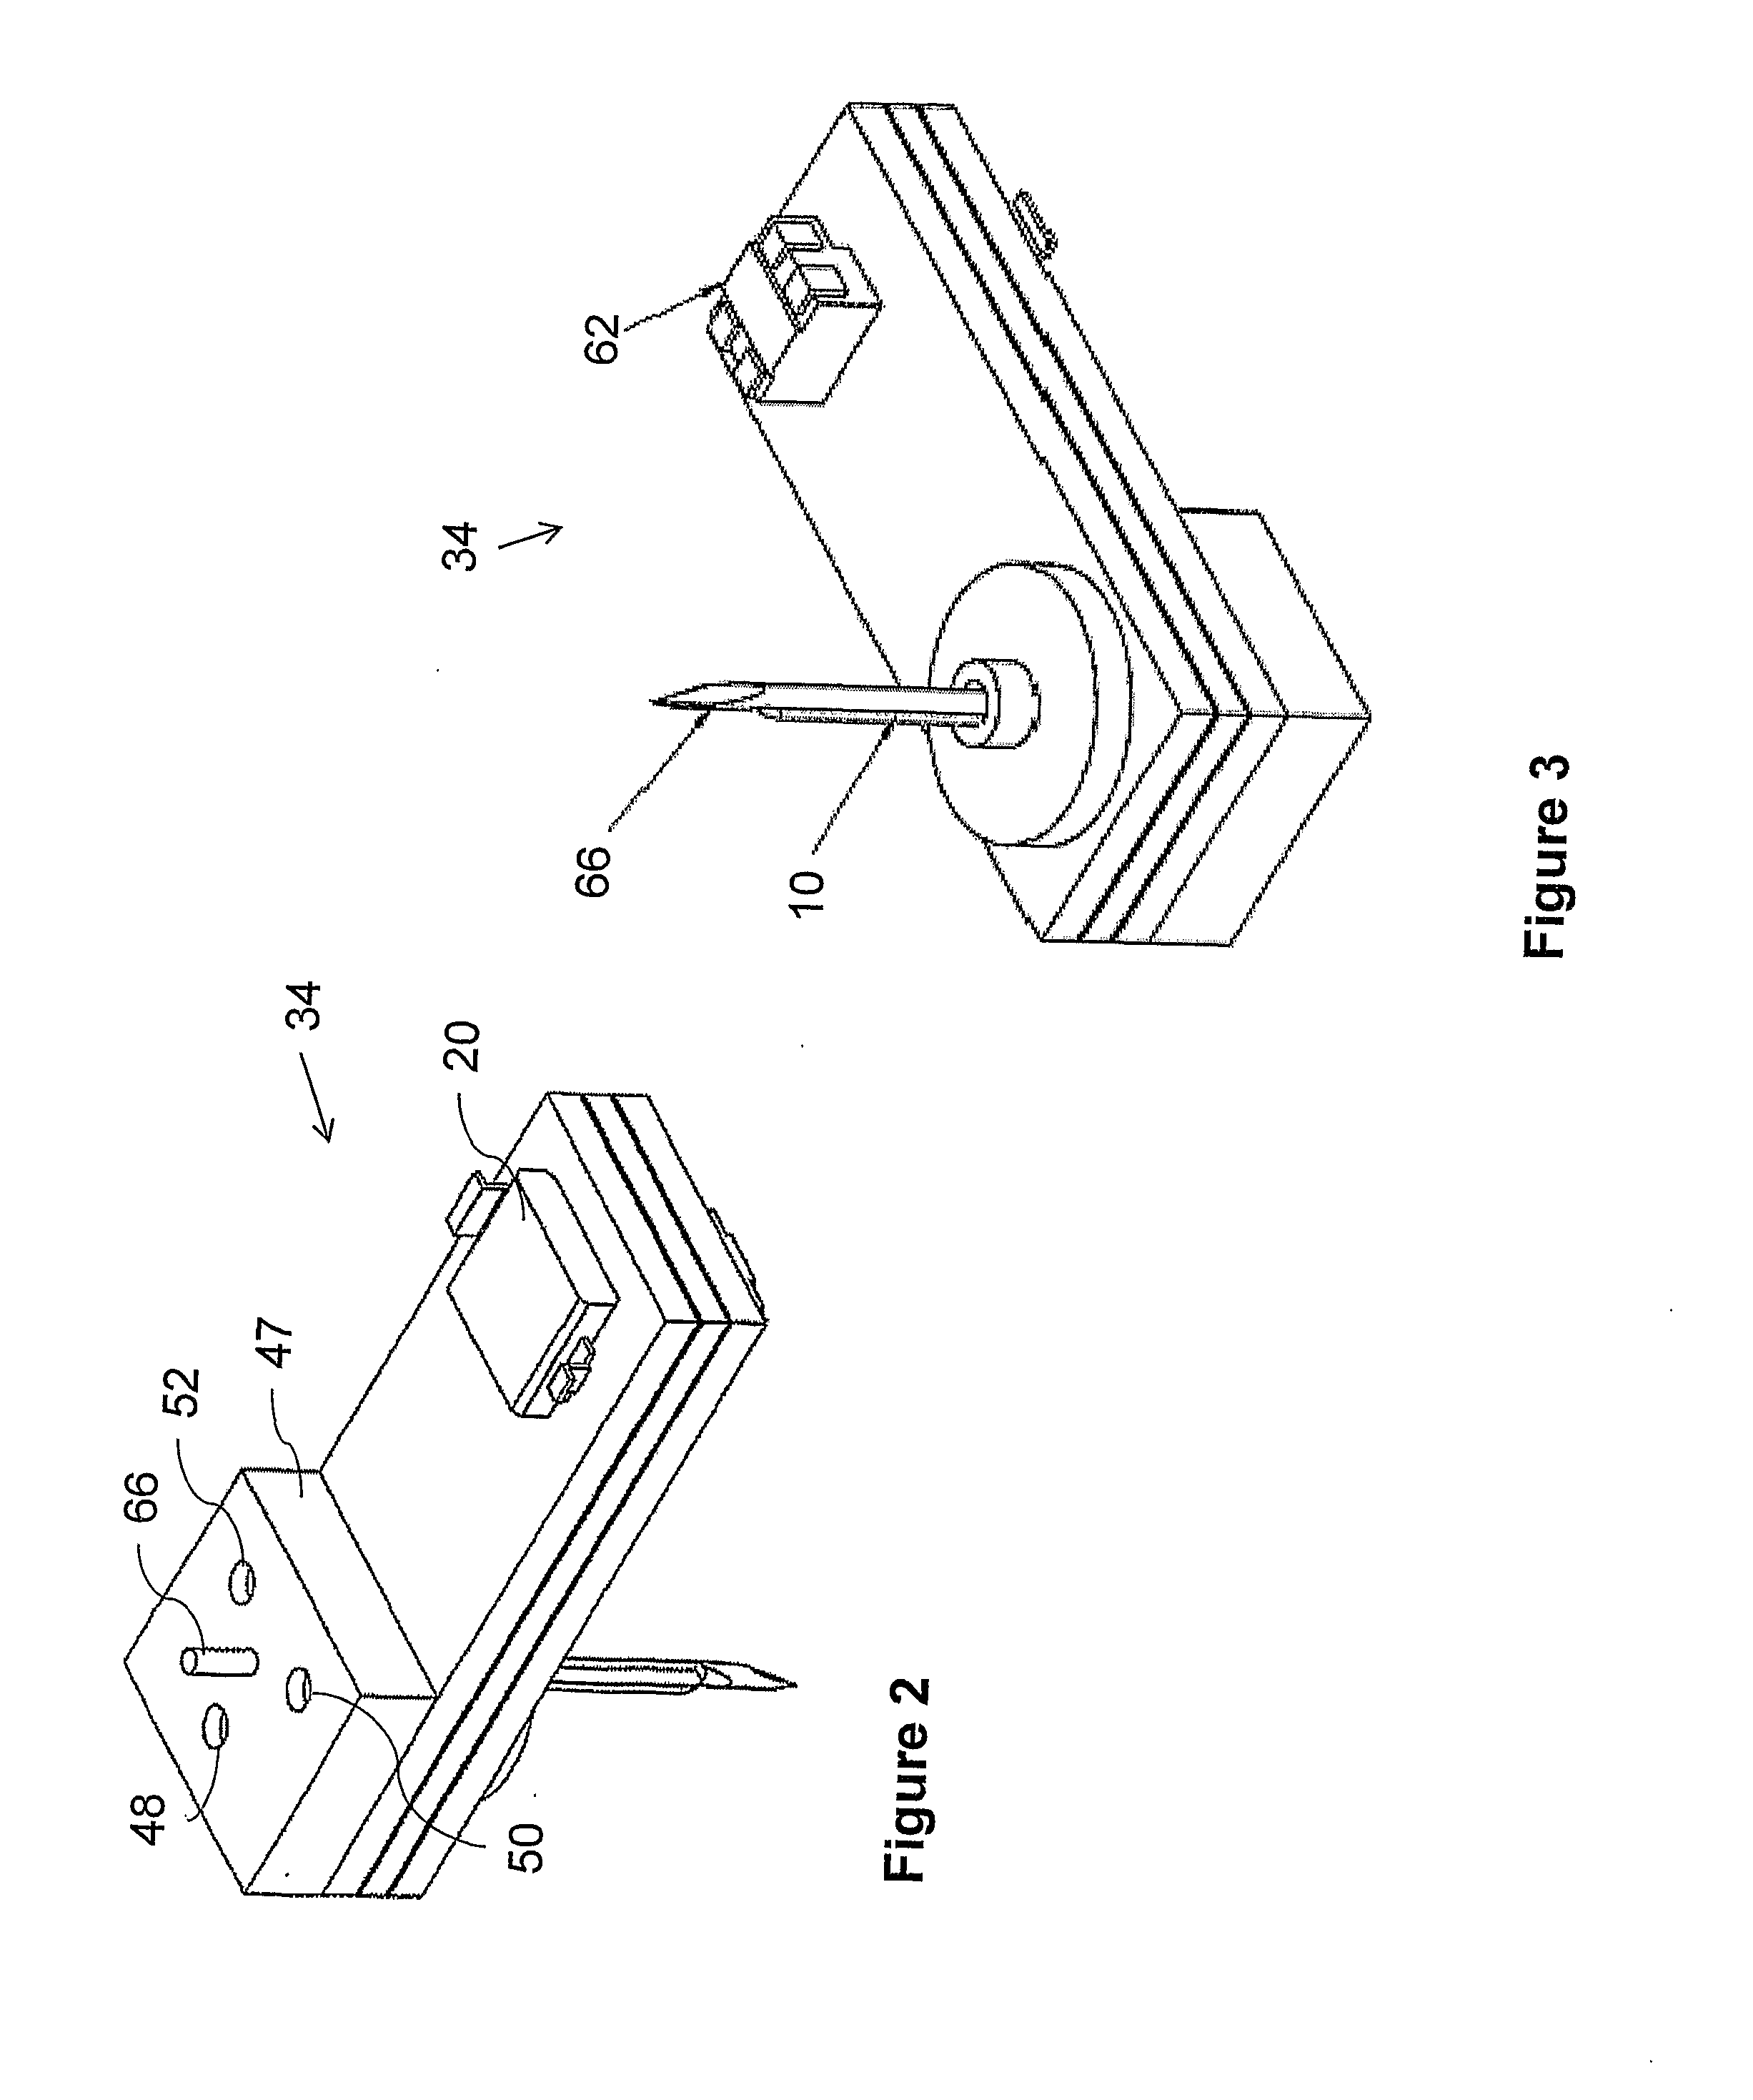 Systems and methods for implementing rapid response monitoring of blood concentration of a metabolite